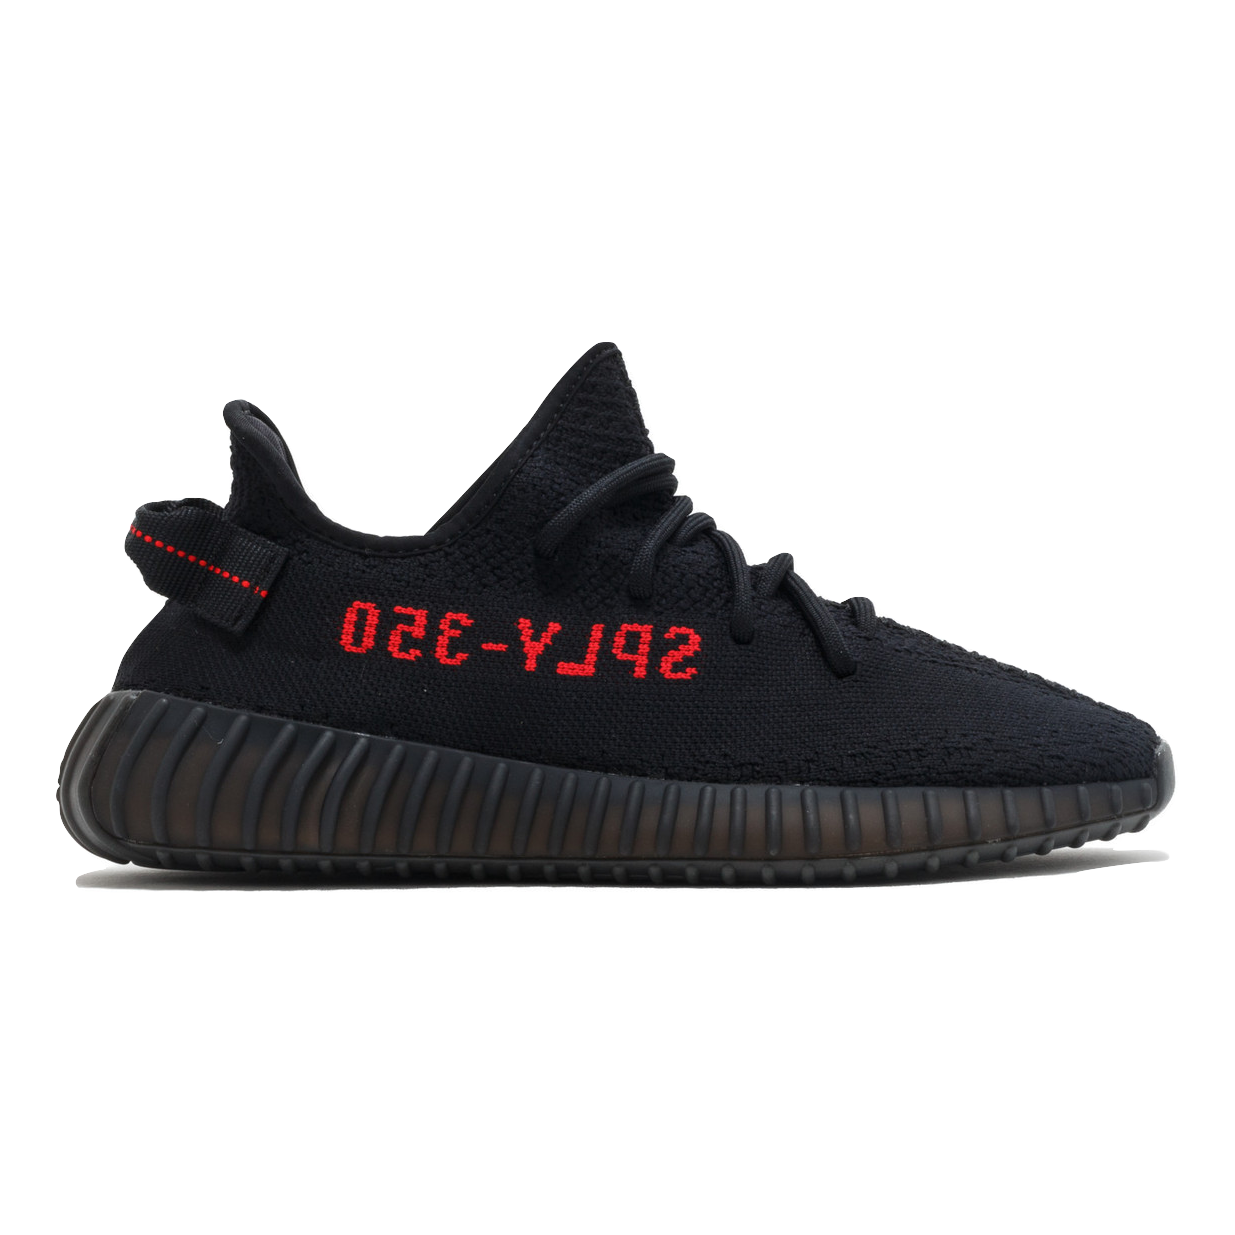 Yeezy Boost 350 V2 - Bred - Used